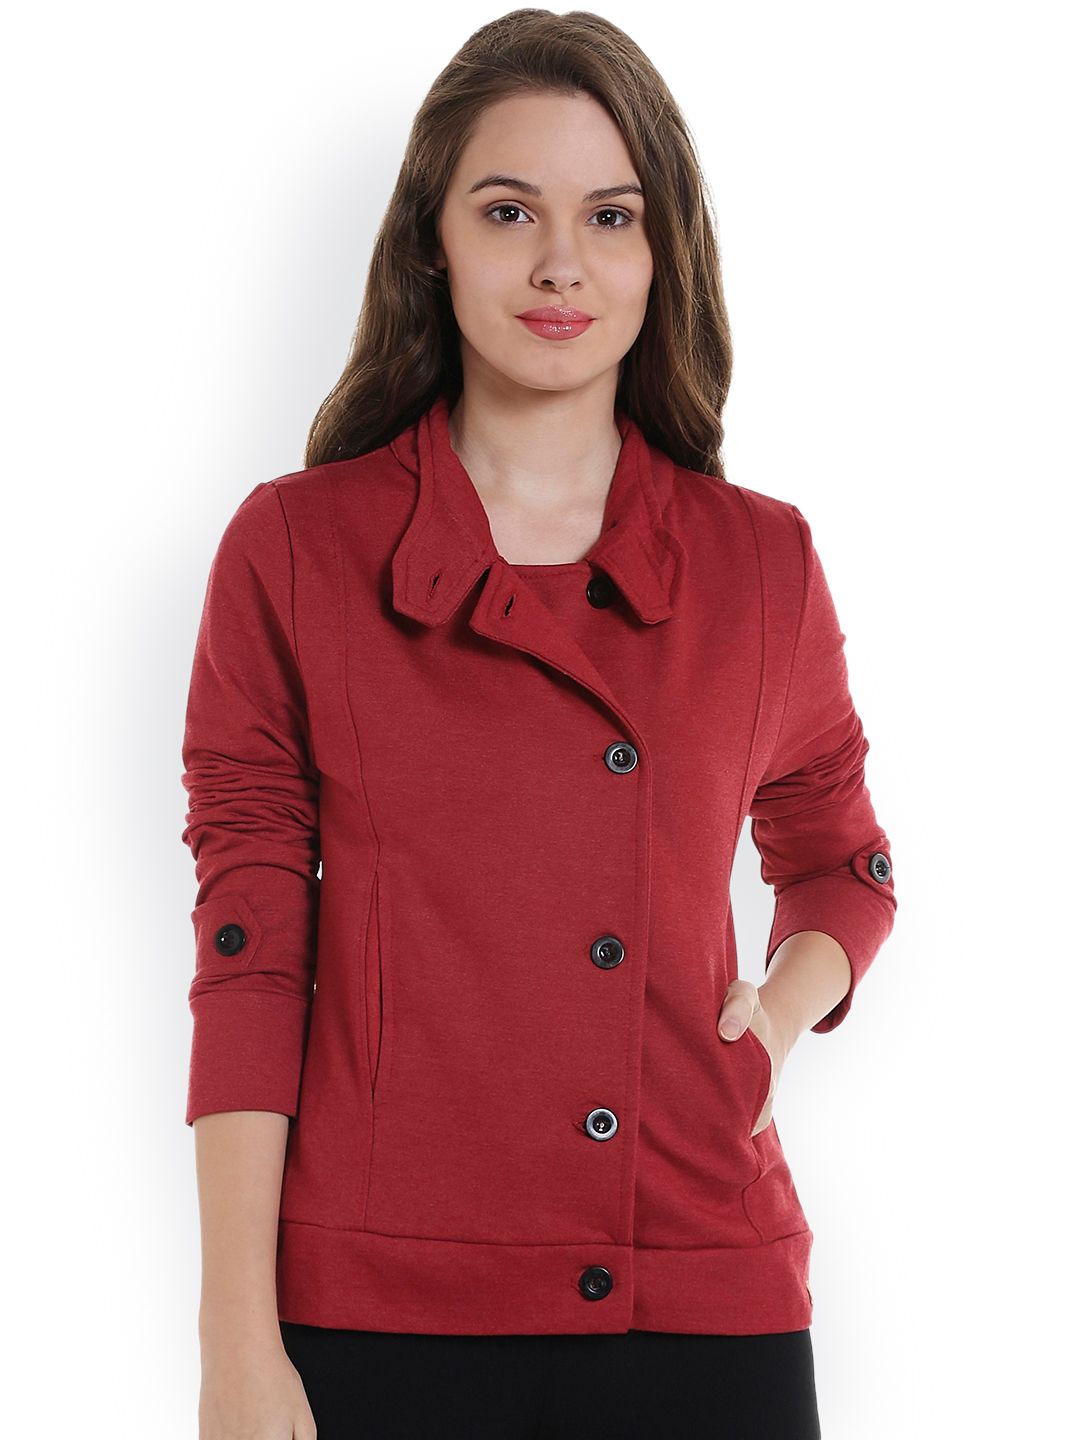 Campus Sutra Women Maroon Solid Sporty Jacket Price in India